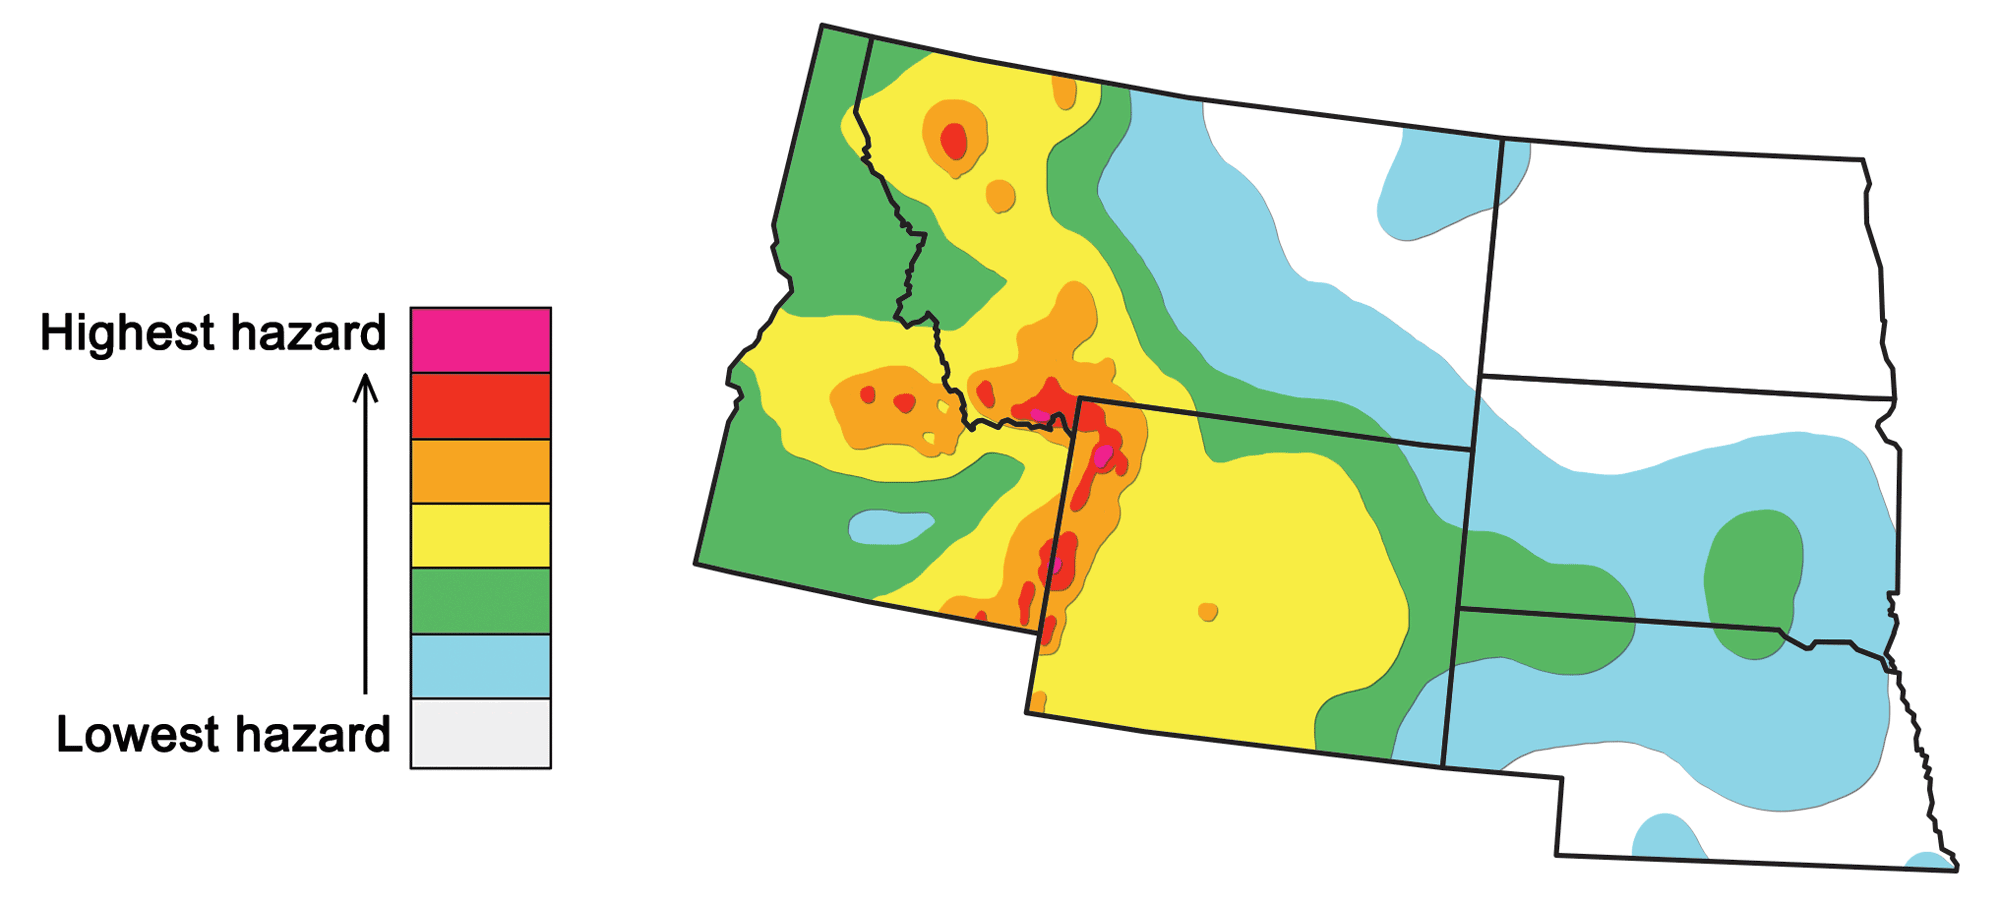 Map of the Northwest Central United States showing differences in seismic hazards across the region. The greatest hazards are in Idaho, western Montana, and western Wyoming.